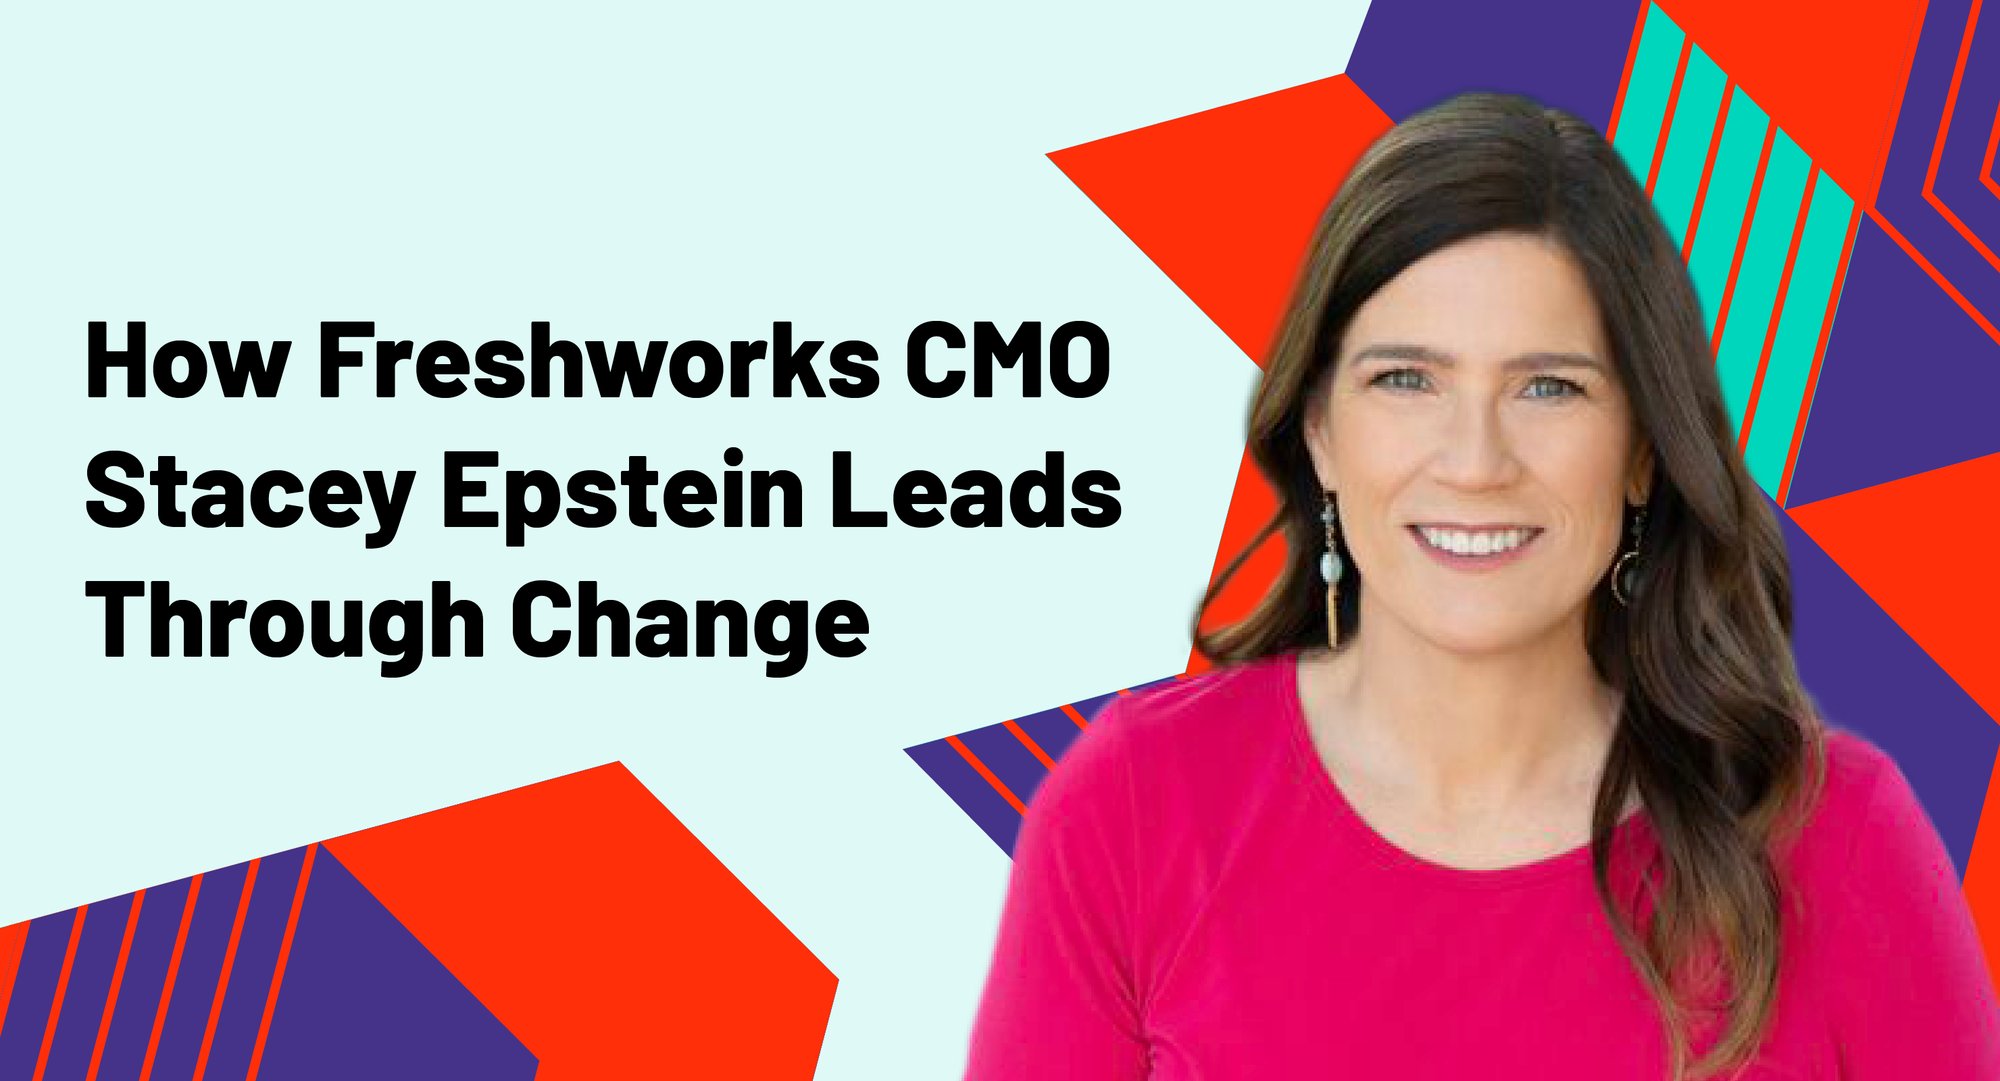 How Freshworks CMO Stacey Epstein Leads Through Change